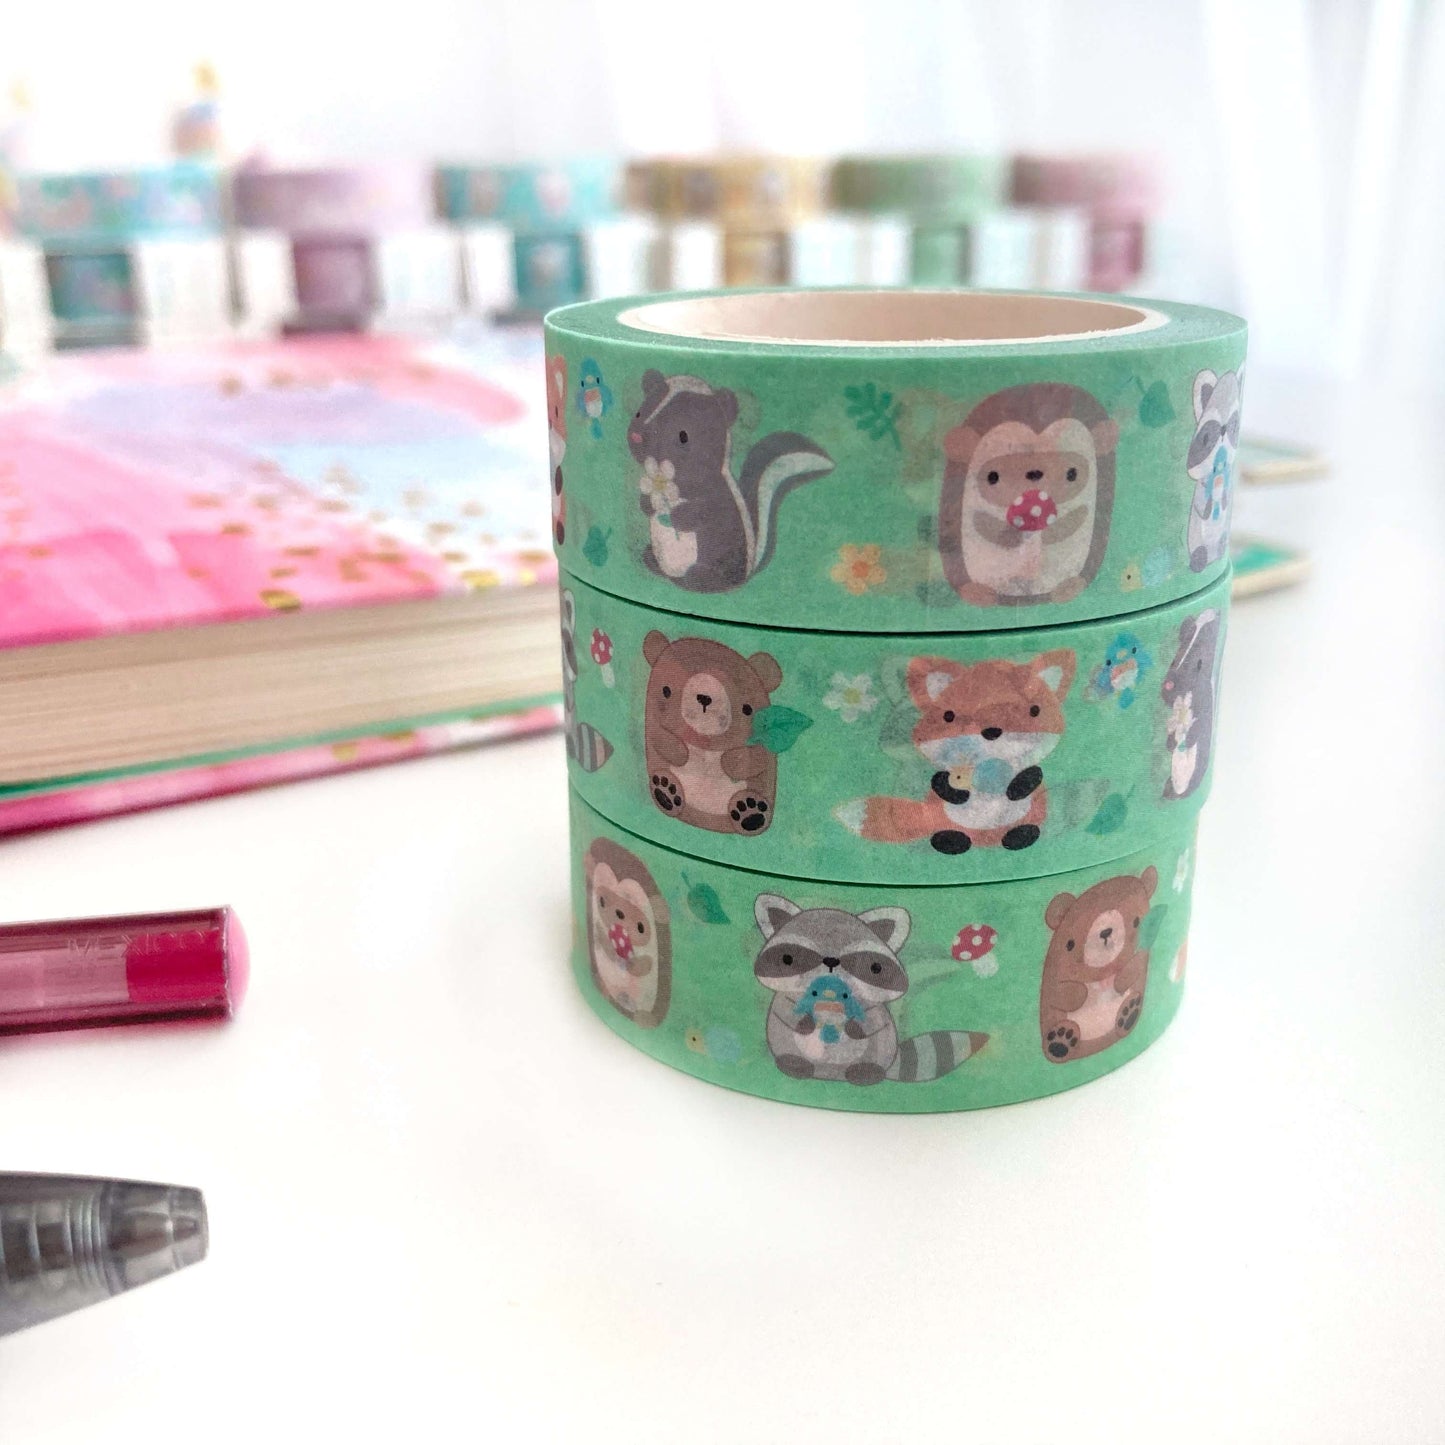 Woodland Animal Washi Tape - Cute Animal Stationery - Bujo Scrapbooking Ideas by Wild Whimsy Woolies